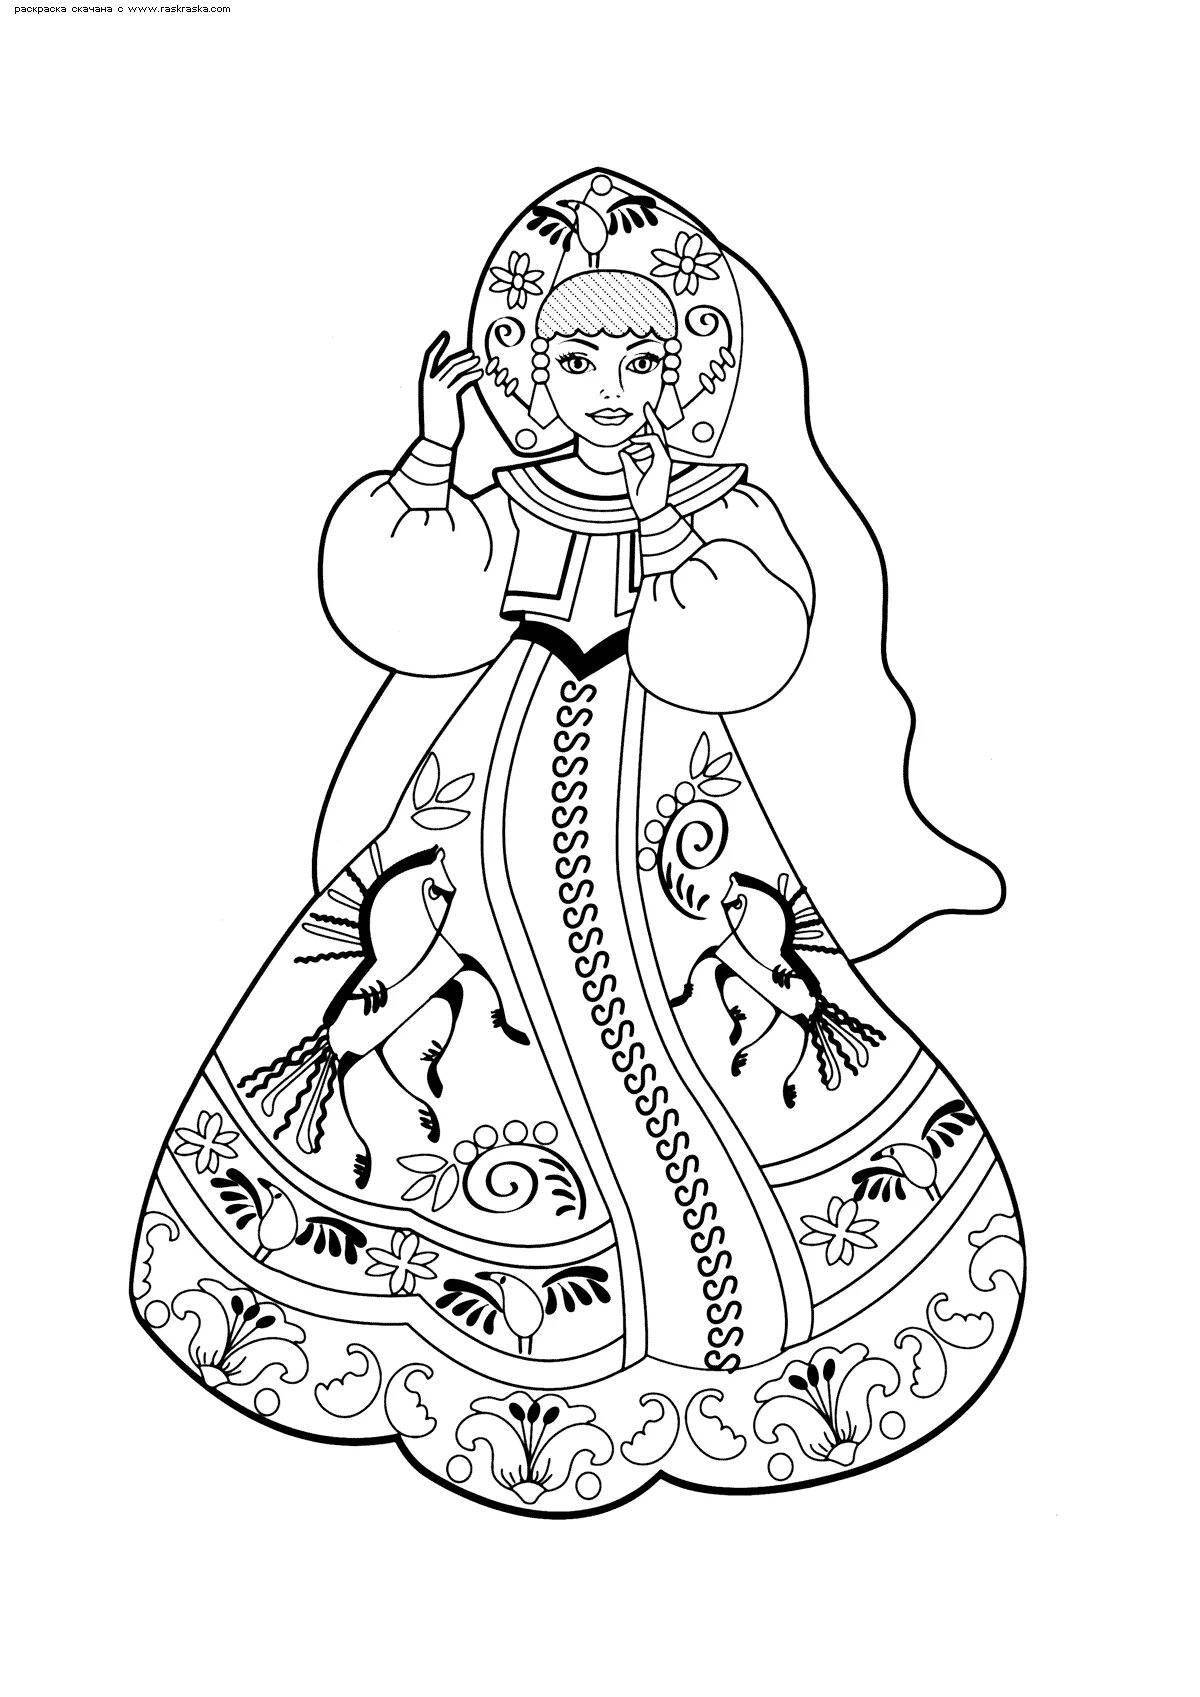 Delightful russian beauty coloring book